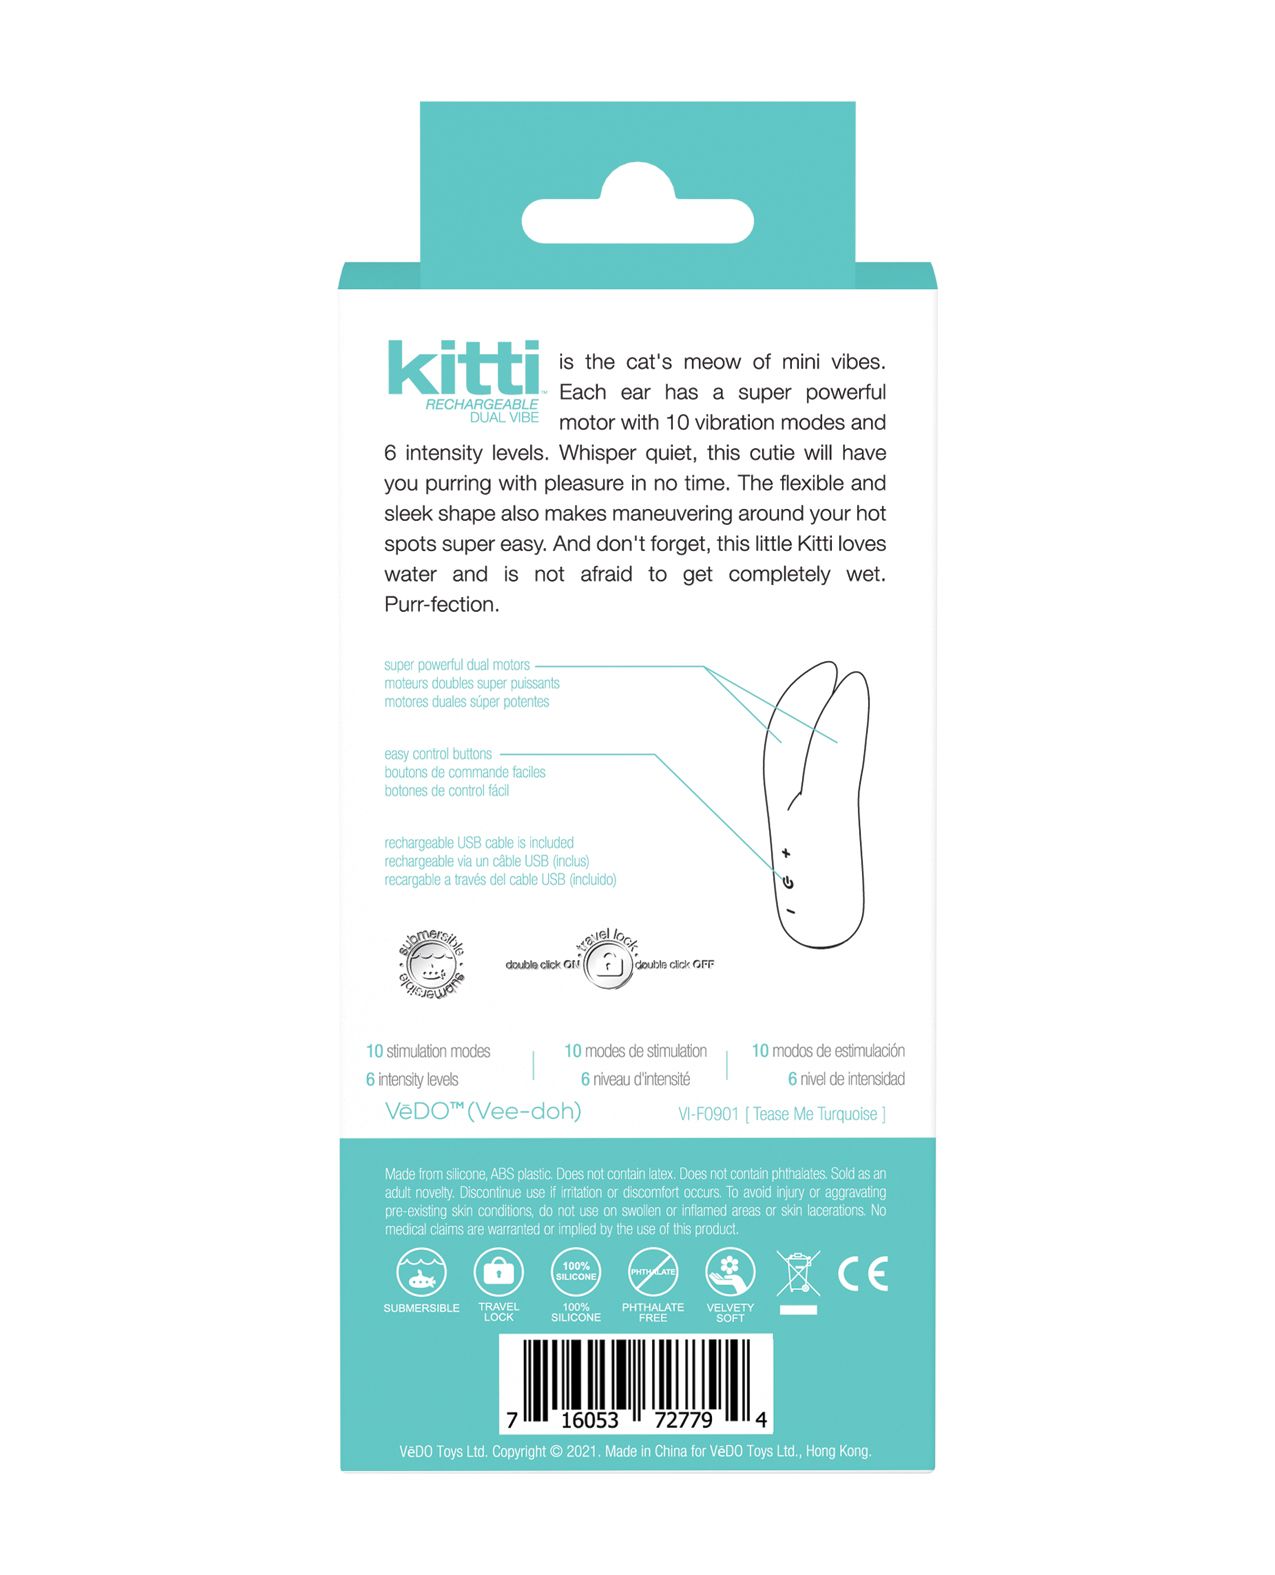 Back of the Kitti box (turquoise).